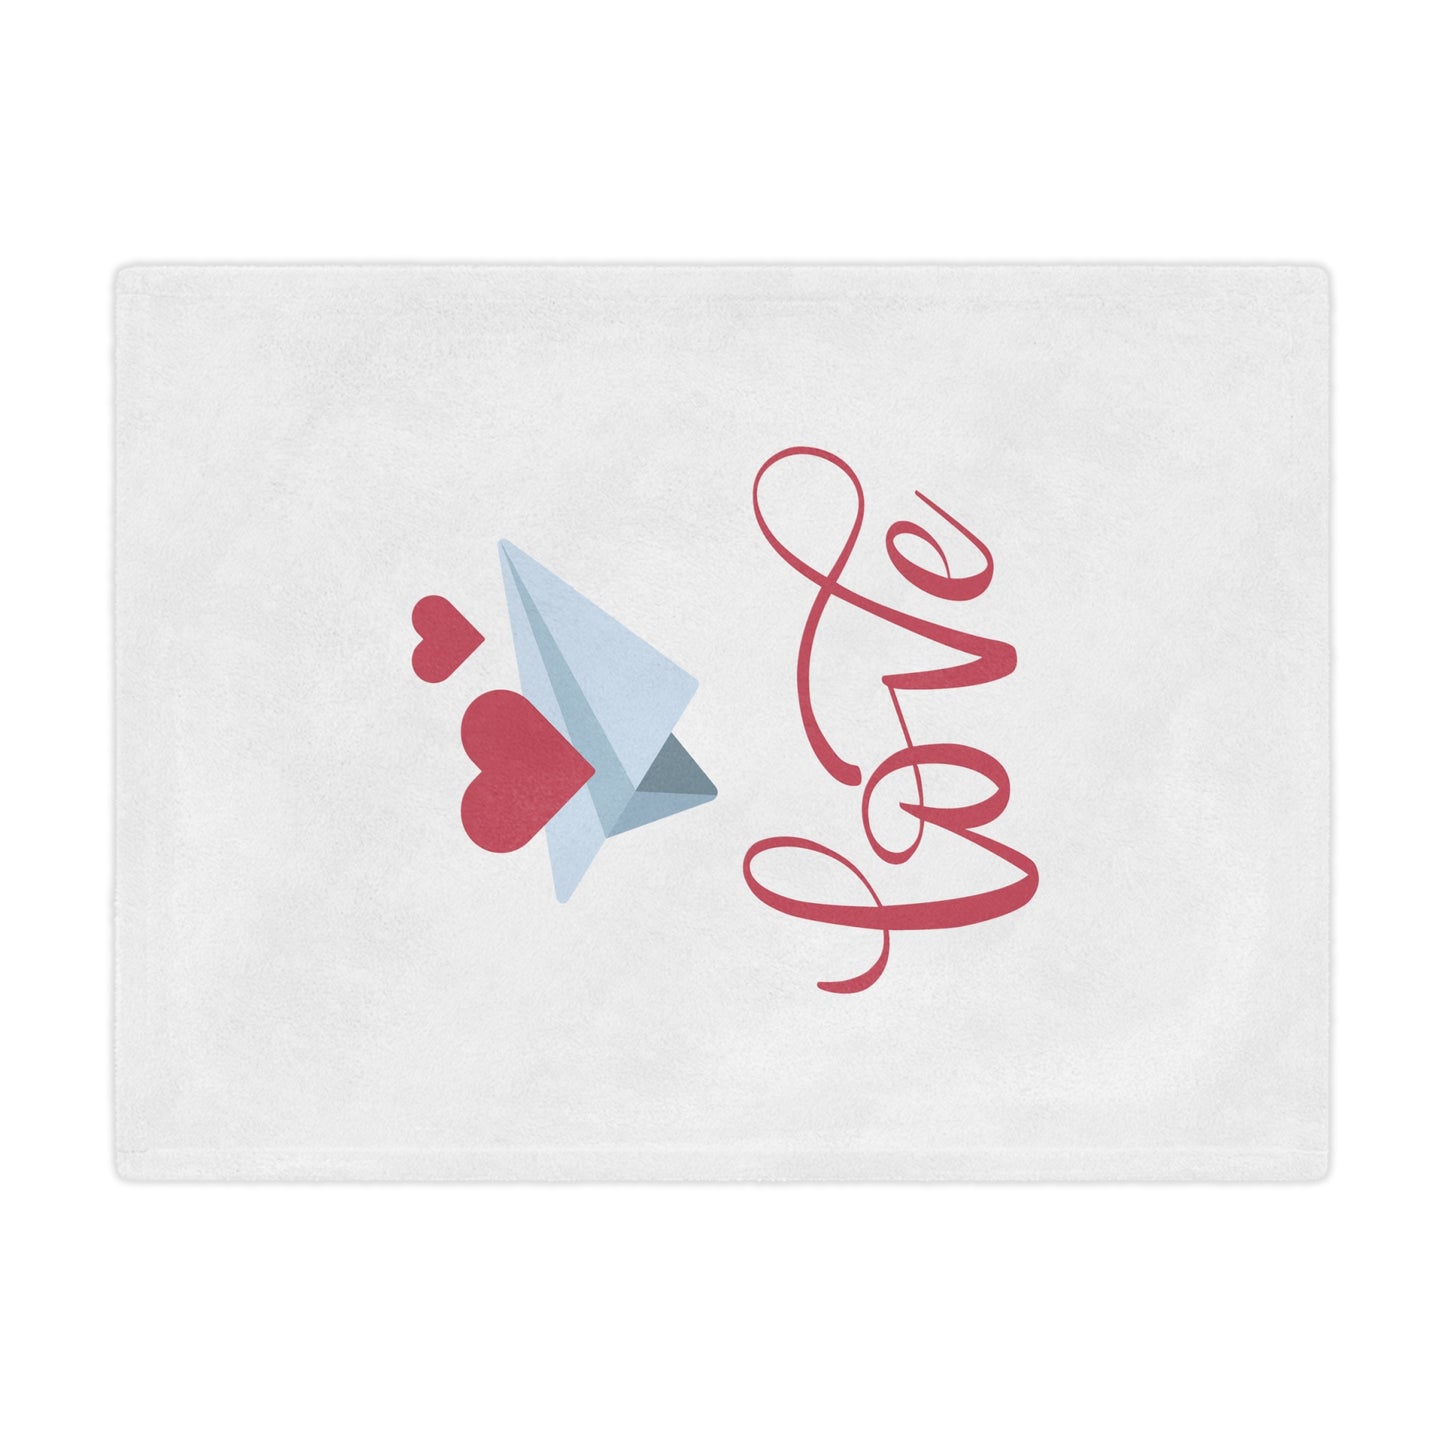 Love with Flying Hearts Printed Minky Blanket for Valentine